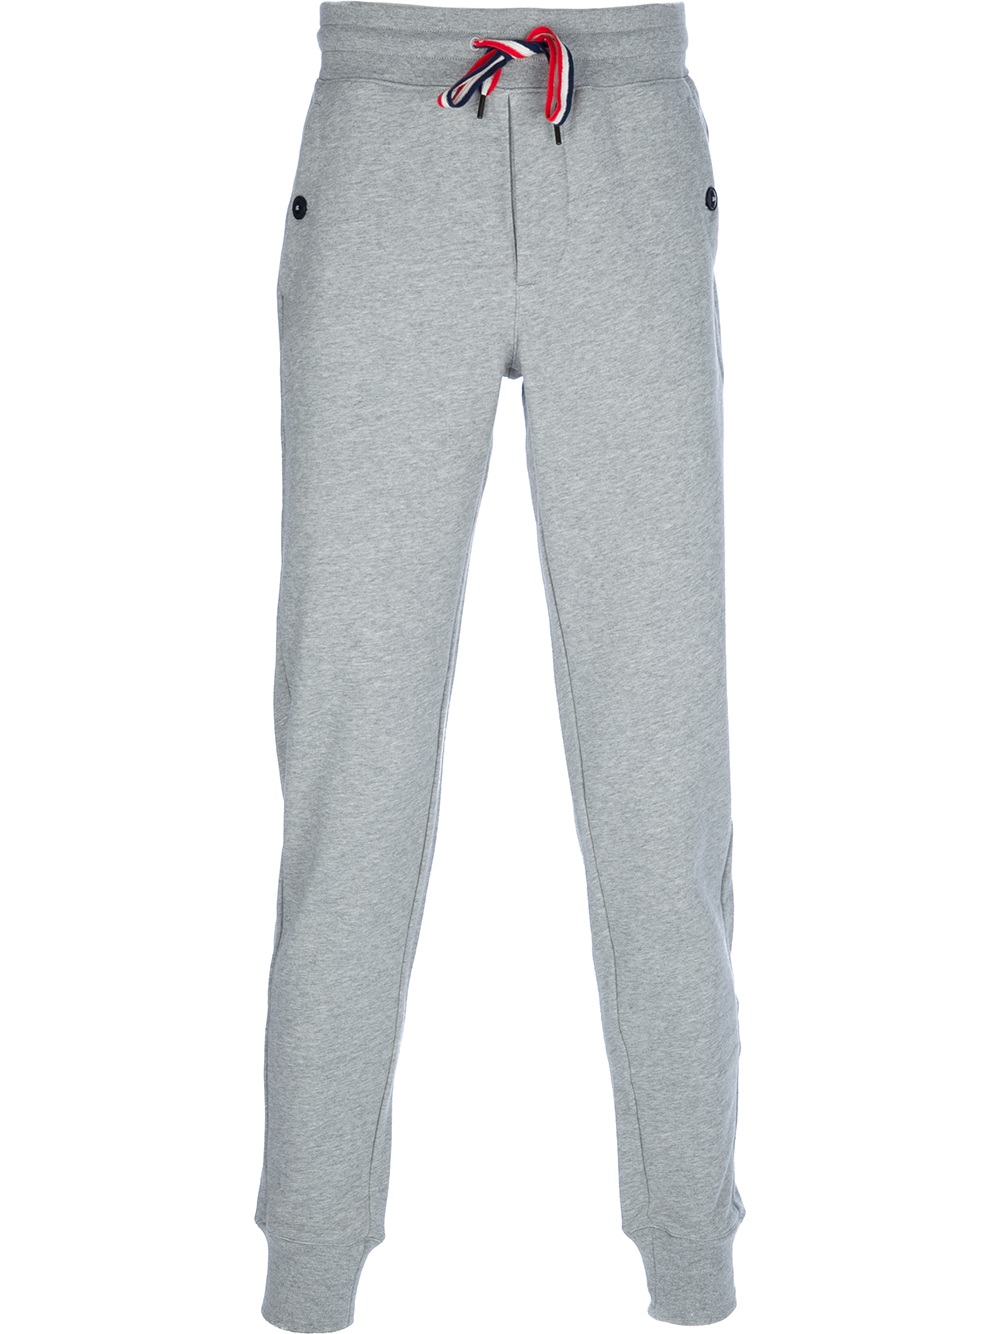 Moncler Tapered Track Pants in Grey (Gray) for Men - Lyst